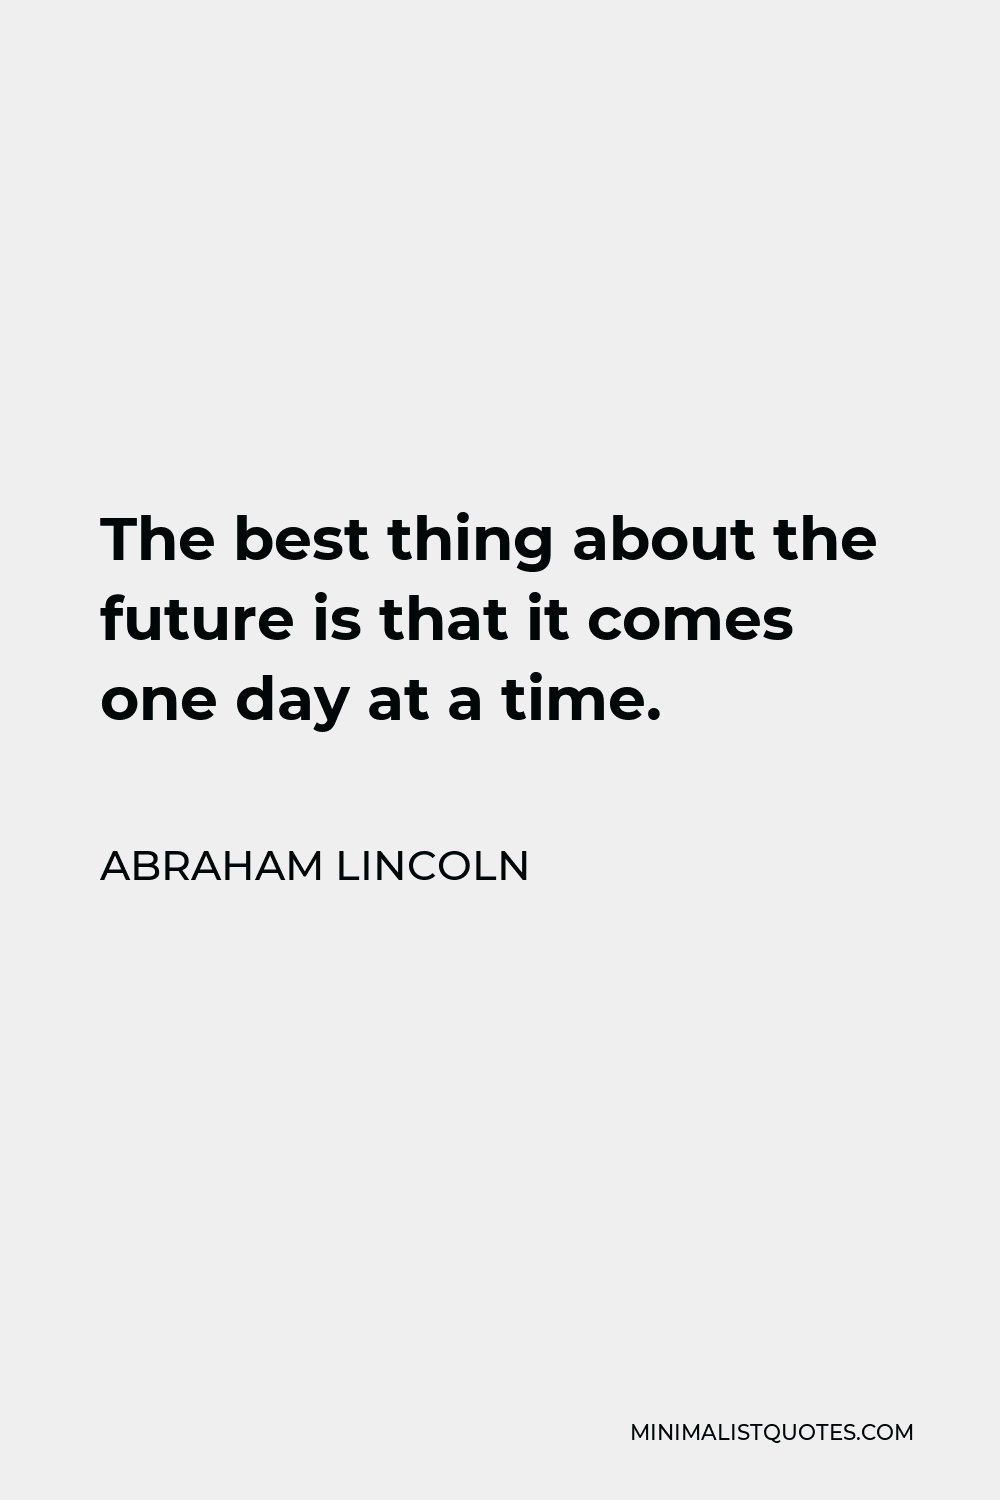 Abraham Lincoln Quote - The best thing about the future is that it comes one day at a time.